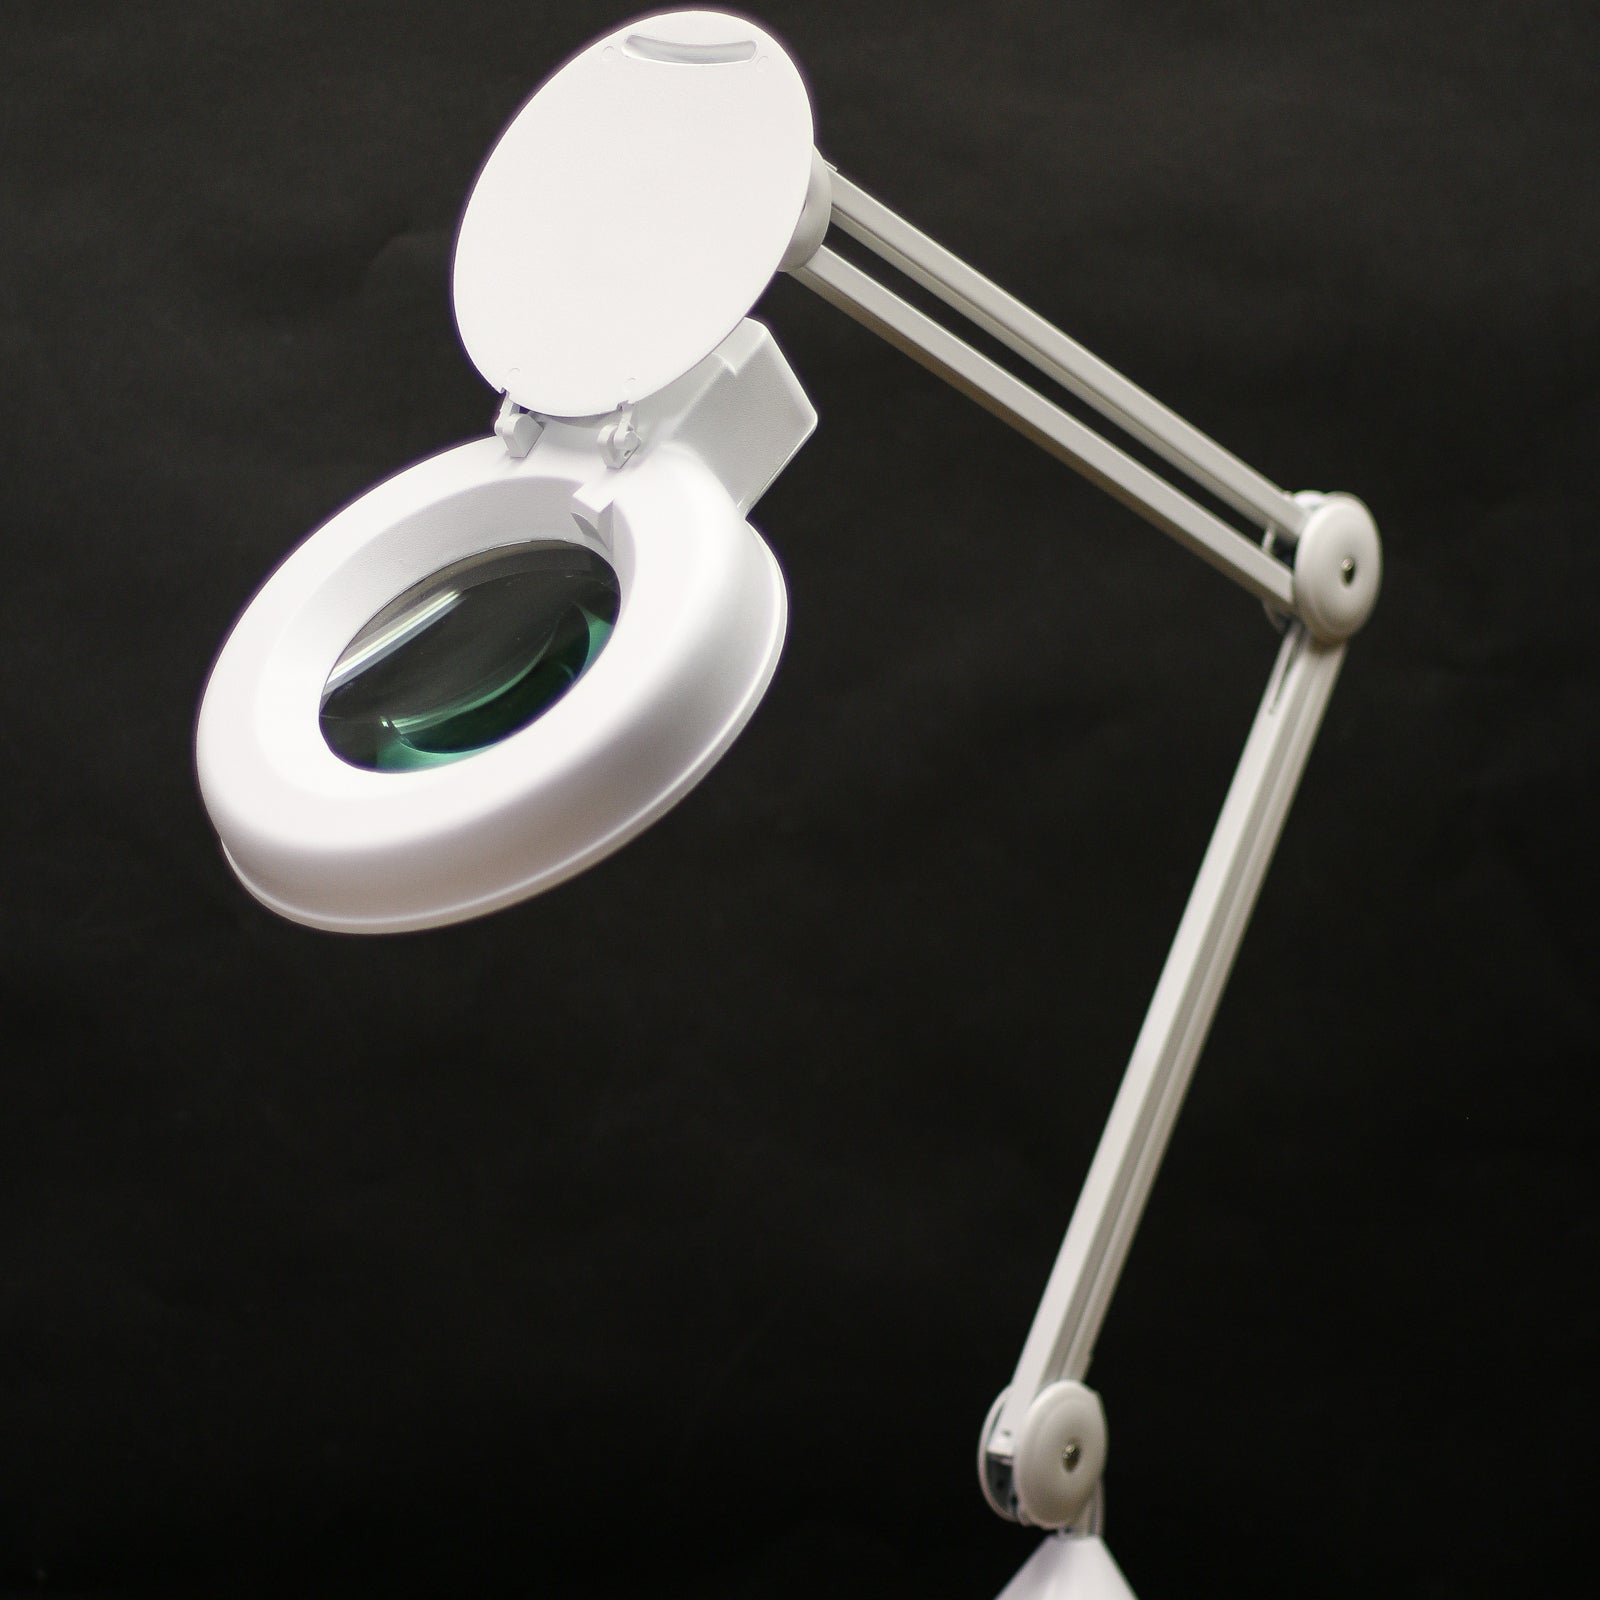 Articulated LED Lamp with Magnifier